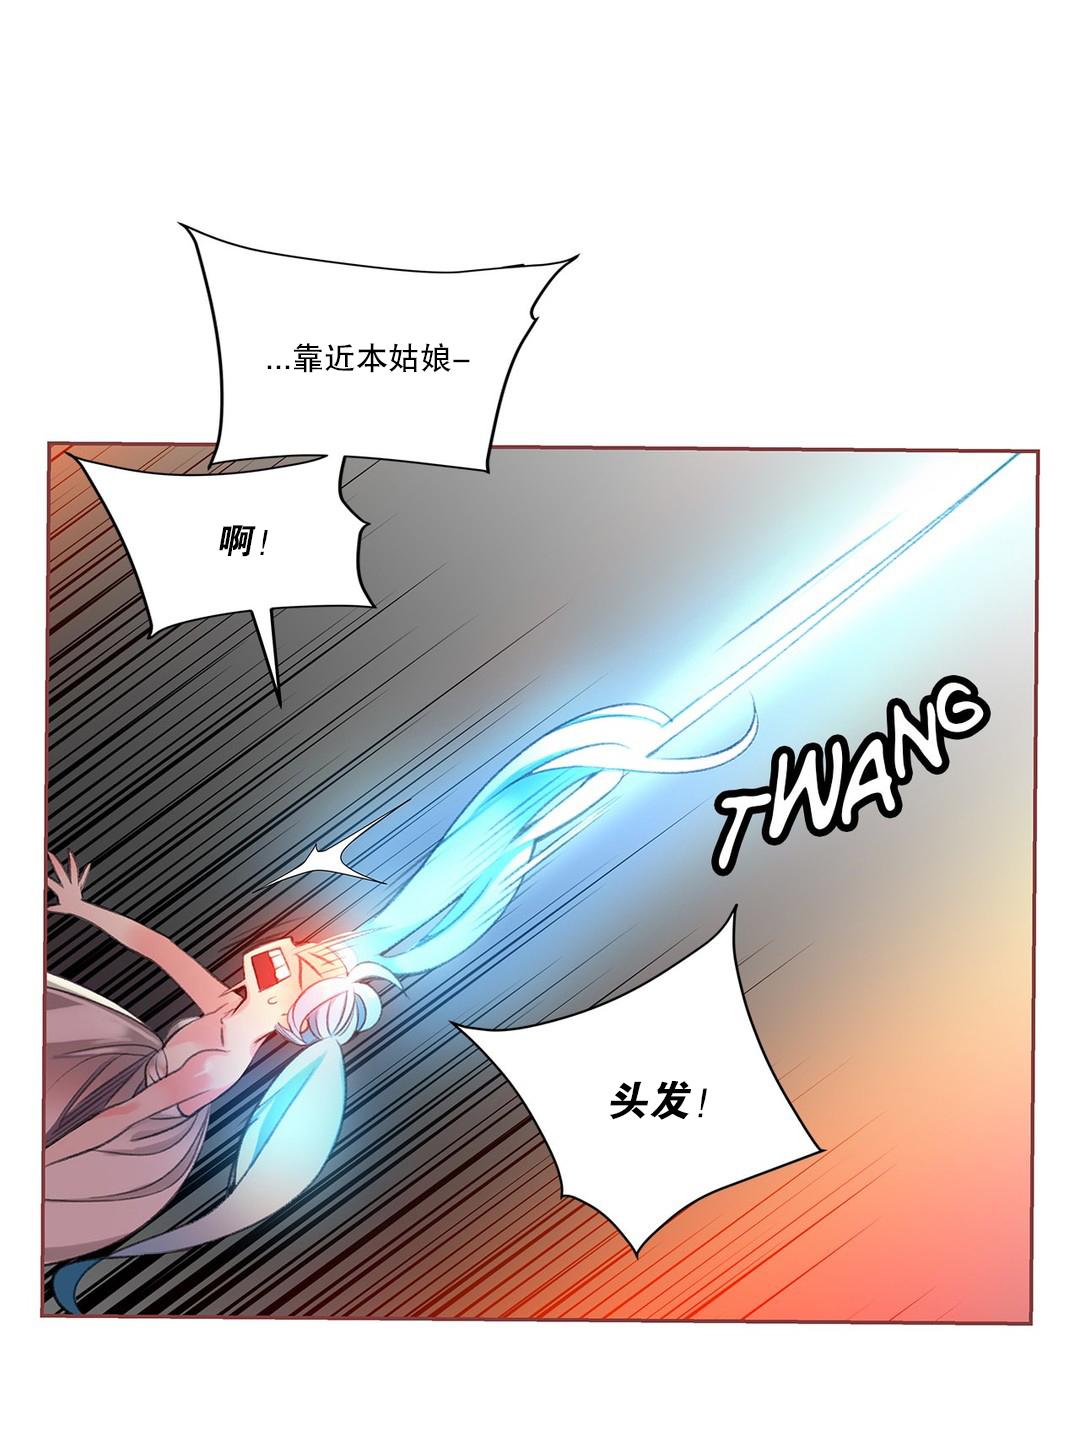 [Juder] Lilith`s Cord (第二季) Ch.61-65 [Chinese] [aaatwist个人汉化] [Ongoing] 9